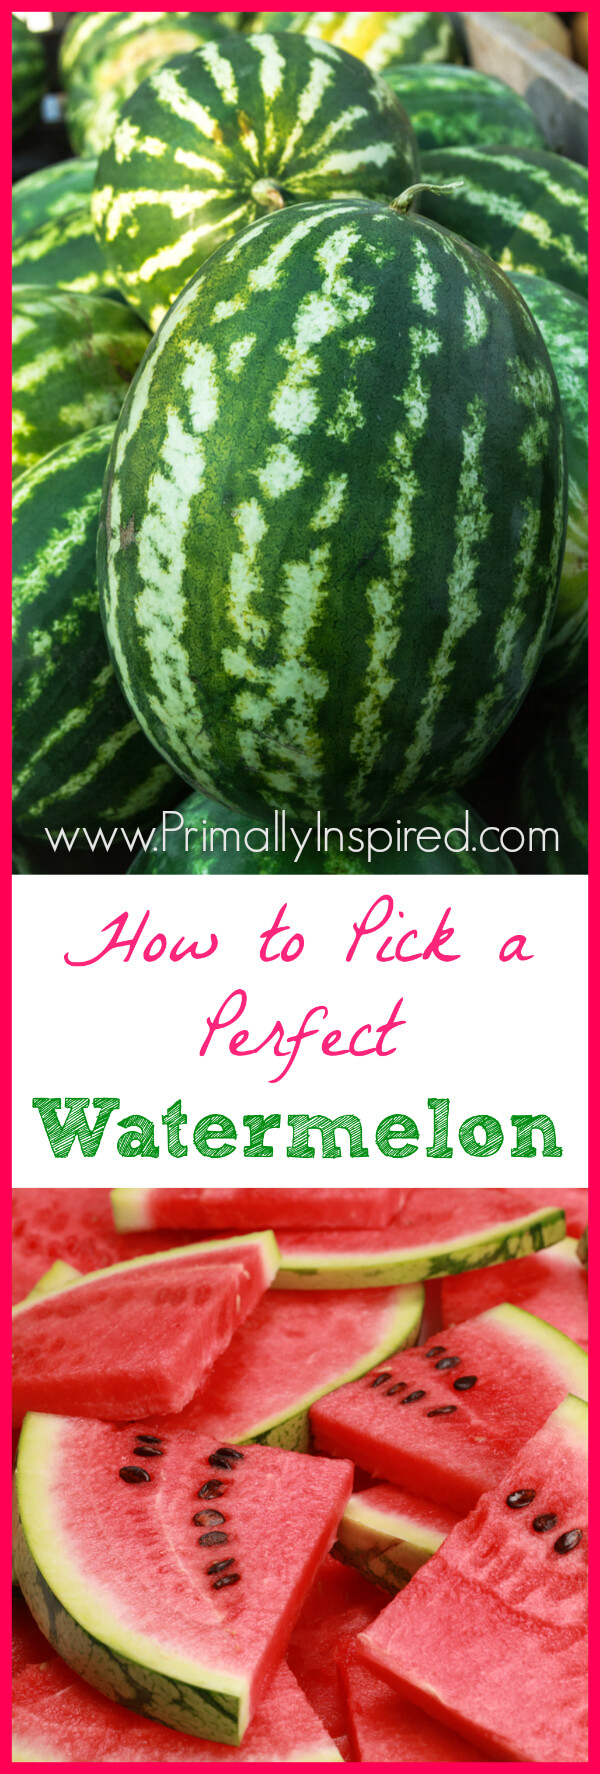 How to Pick a Perfect Watermelon by Primally Inspired